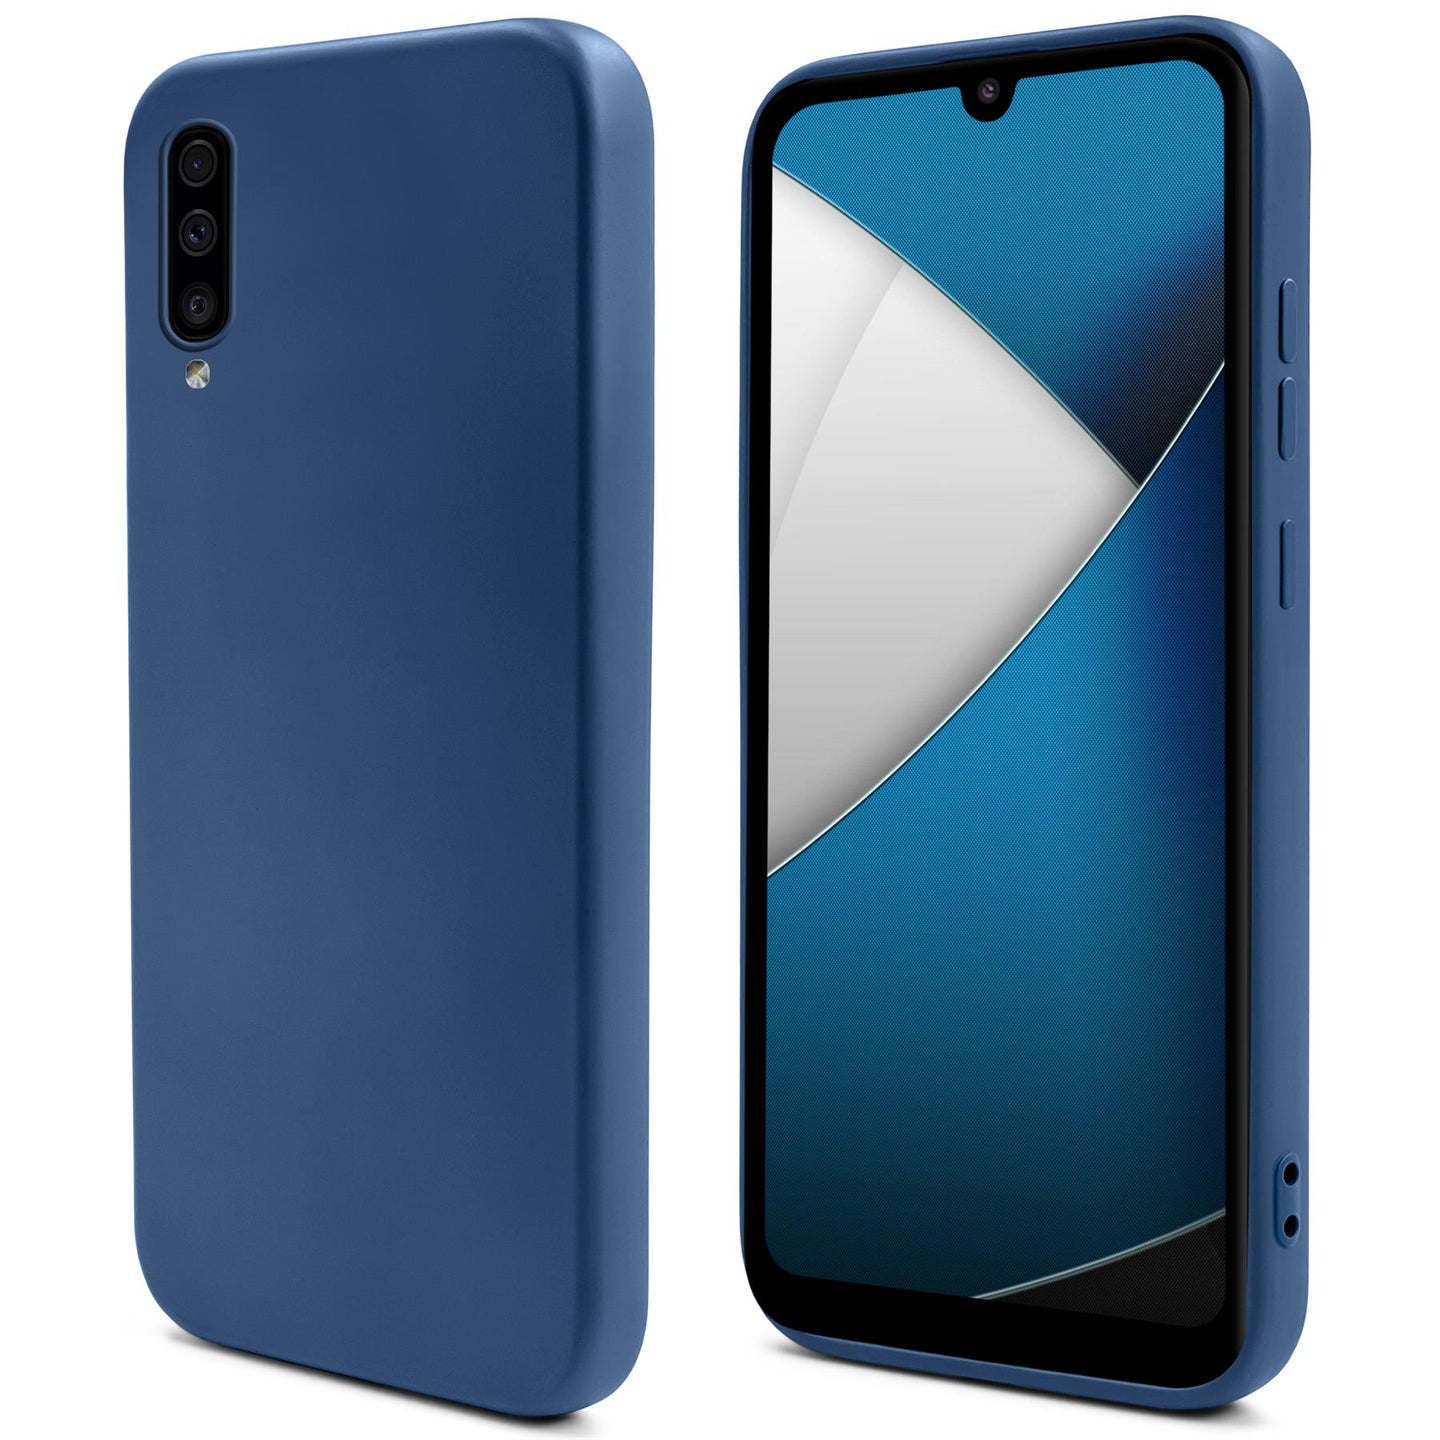 Moozy Lifestyle. Silicone Case for Samsung A50, Midnight Blue - Liquid Silicone Lightweight Cover with Matte Finish and Soft Microfiber Lining, Premium Silicone Case